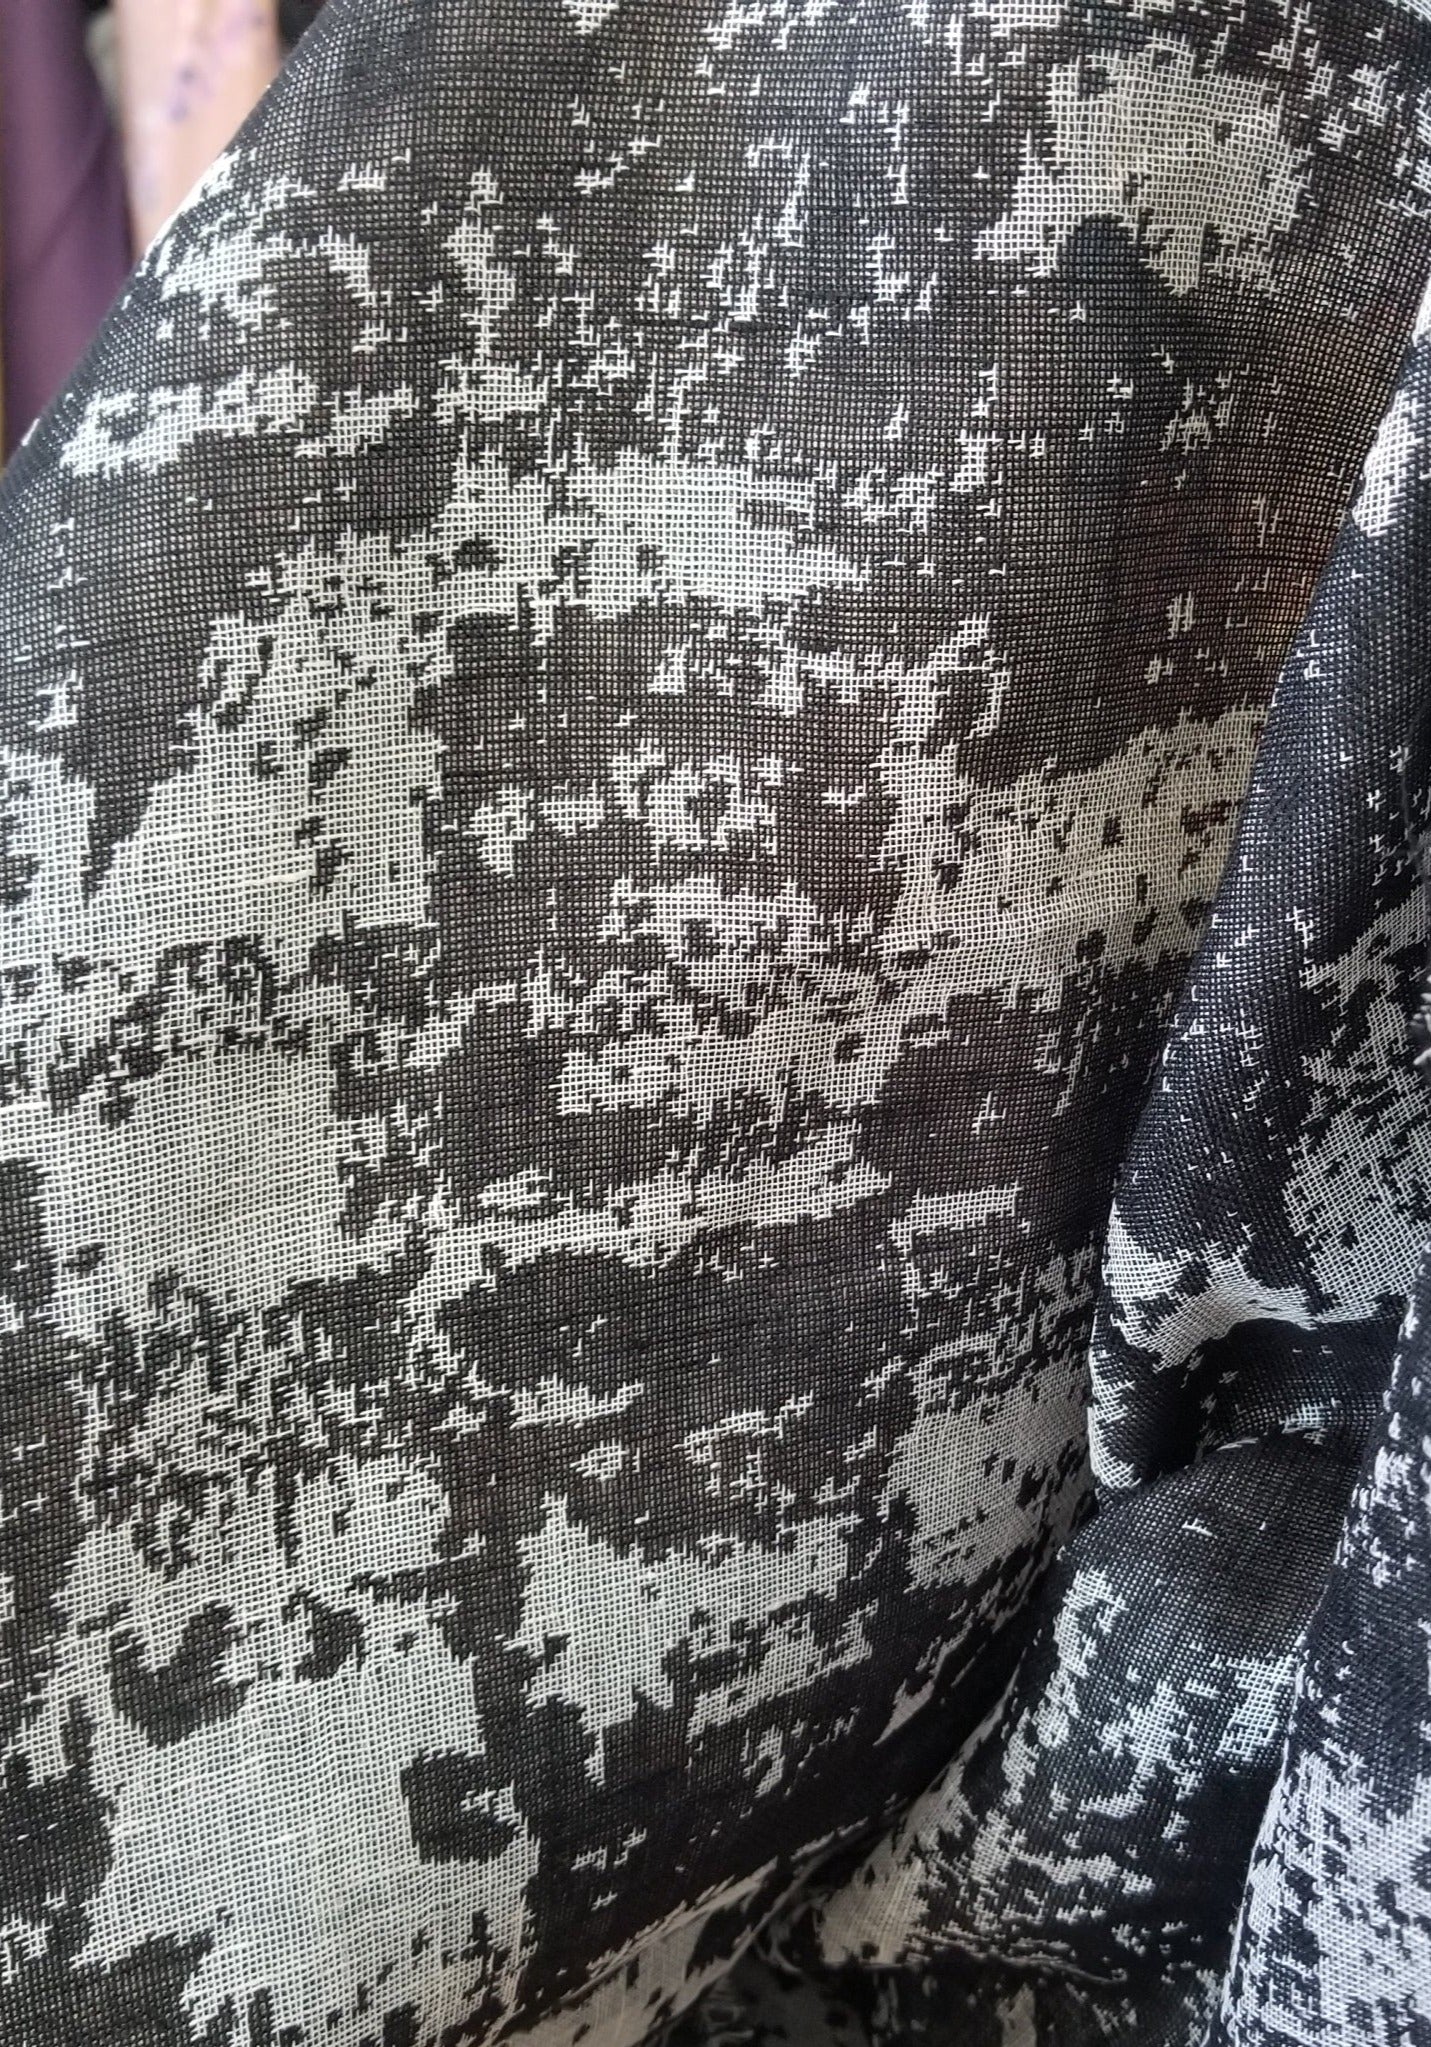 Designer Deadstock Linen Grunge Double Gauze Jacquard Black and Gray Woven- by the yard